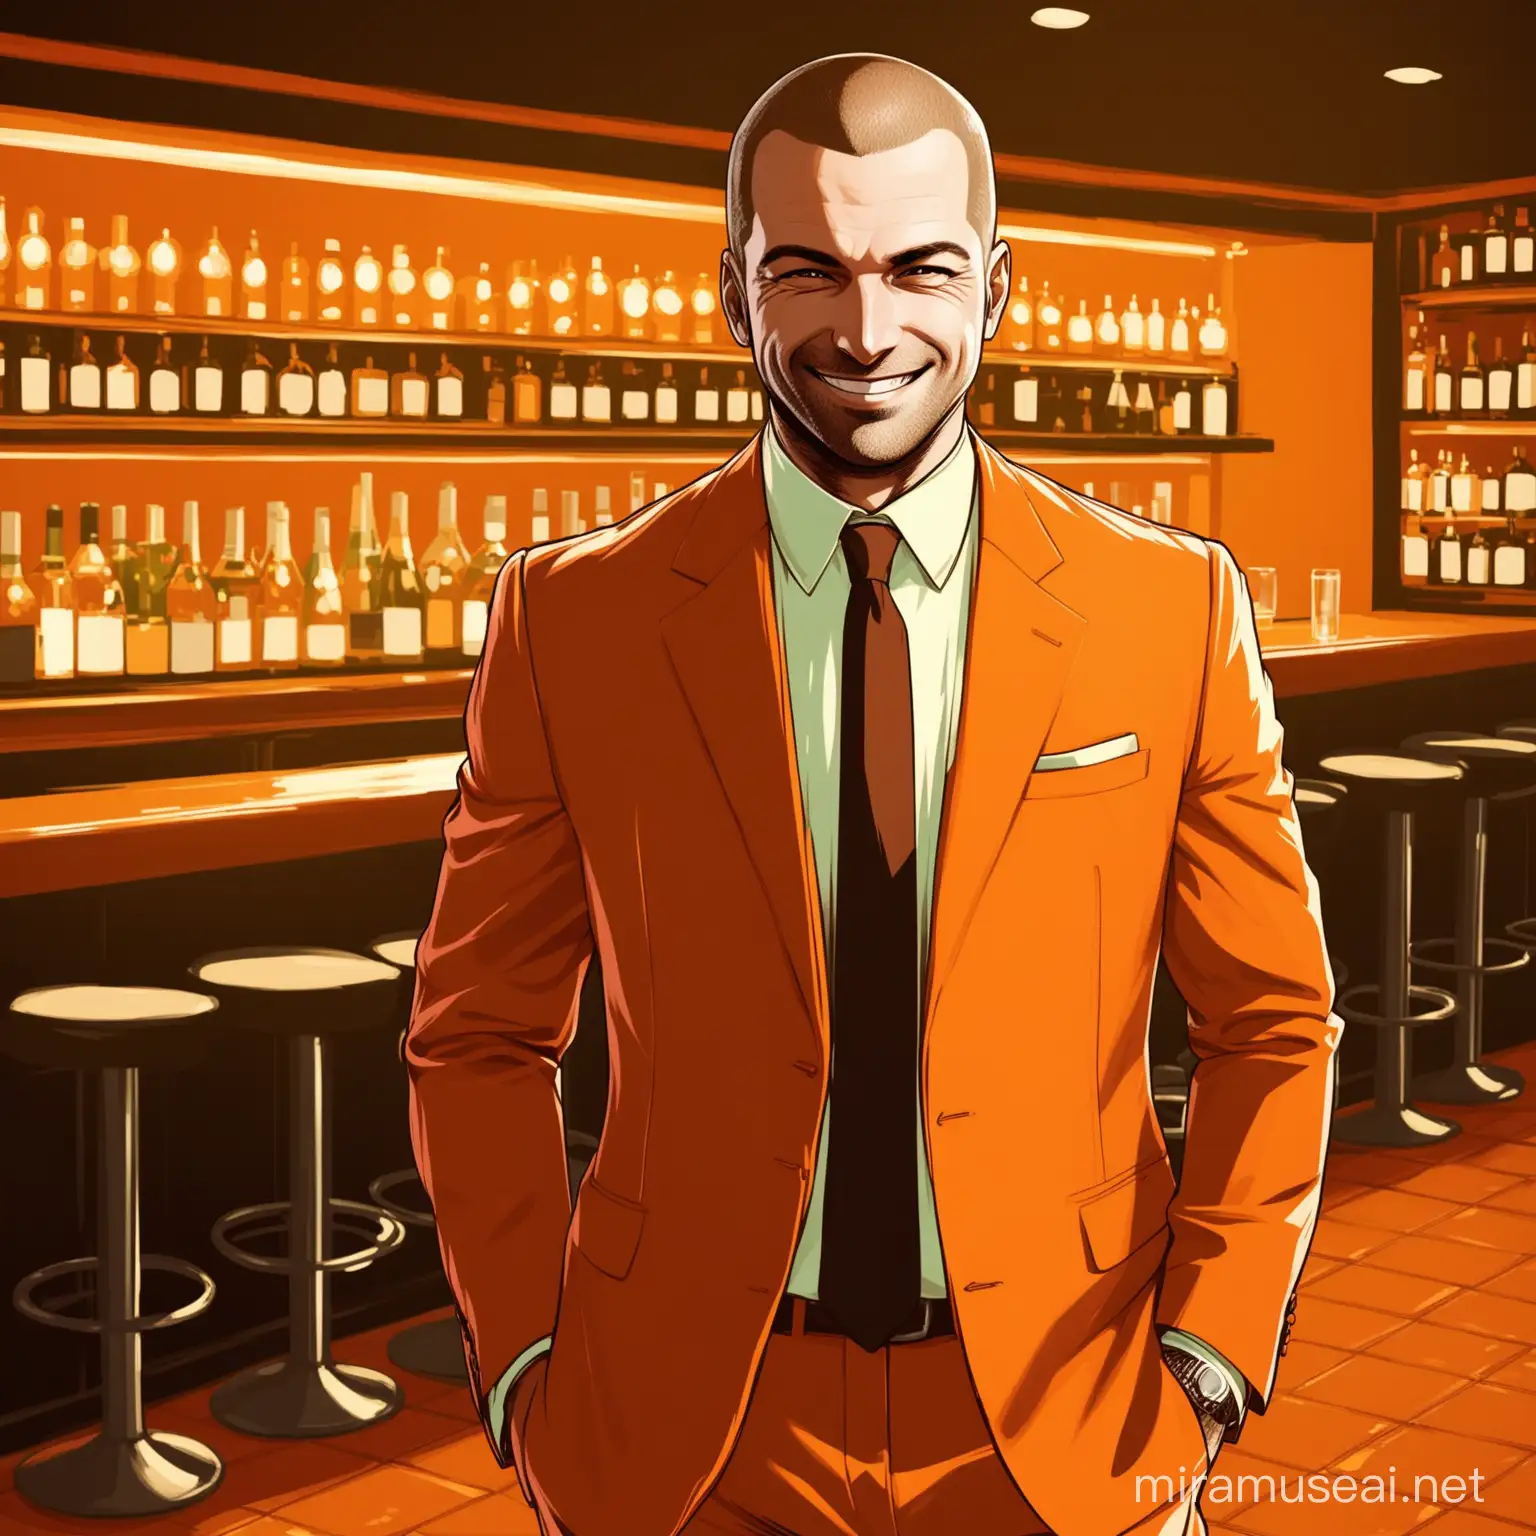 smiling man in business suit. standing in a bar. orange colored theme. make image gta iv style